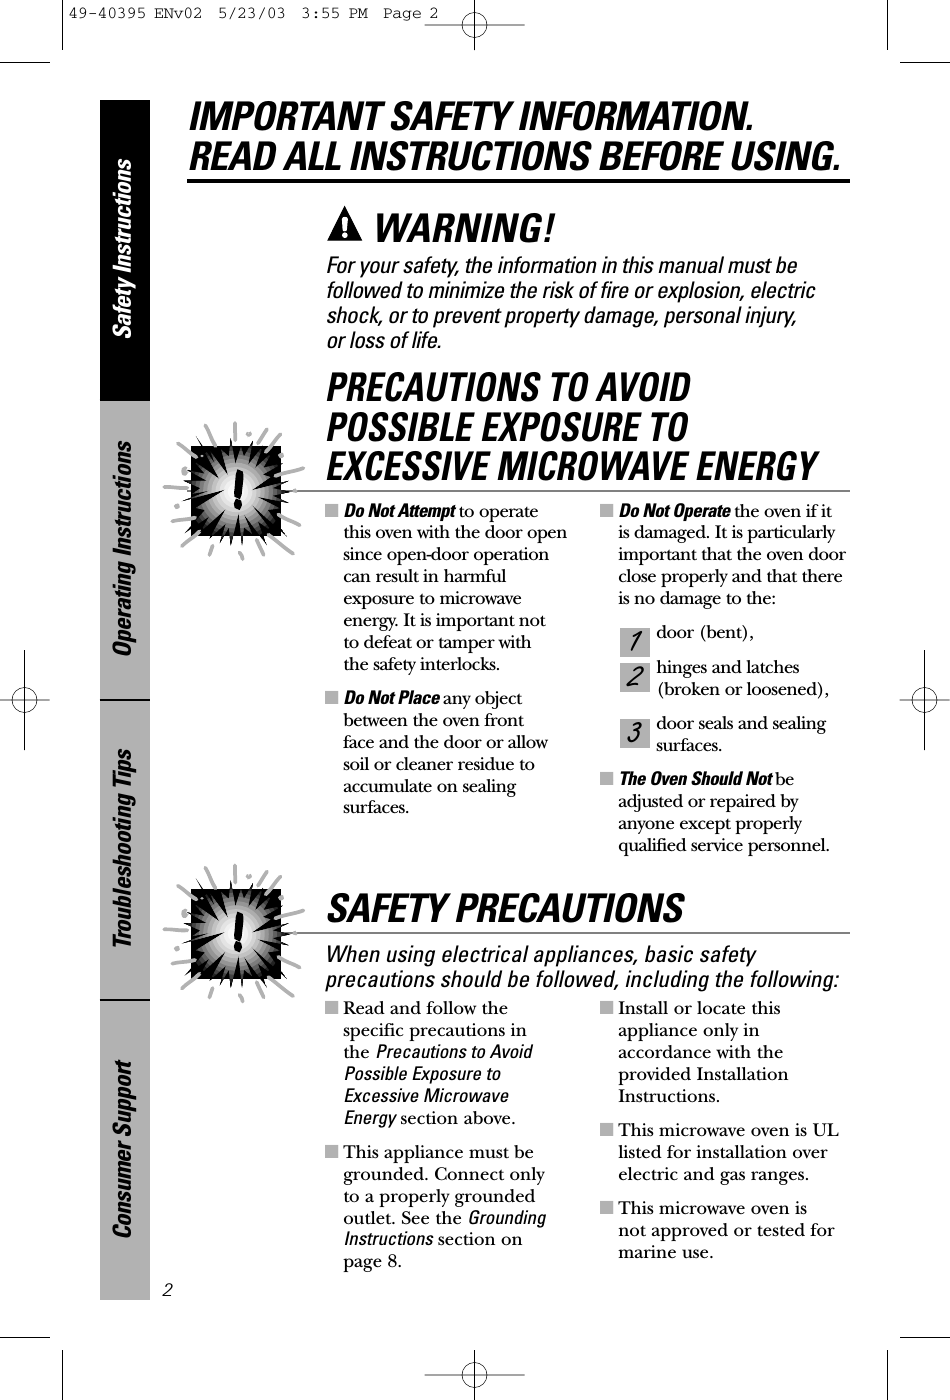 ■Read and follow the specific precautions in the Precautions to AvoidPossible Exposure toExcessive Microwave Energy section above.■This appliance must begrounded. Connect only to a properly grounded outlet. See the GroundingInstructions section on page 8.■Install or locate thisappliance only inaccordance with theprovided InstallationInstructions.■This microwave oven is ULlisted for installation overelectric and gas ranges.■This microwave oven is not approved or tested formarine use.■Do Not Attempt to operate this oven with the door opensince open-door operationcan result in harmfulexposure to microwaveenergy. It is important not to defeat or tamper with the safety interlocks.■Do Not Place any objectbetween the oven front face and the door or allowsoil or cleaner residue toaccumulate on sealingsurfaces.■Do Not Operate the oven if it is damaged. It is particularlyimportant that the oven doorclose properly and that thereis no damage to the:door (bent),hinges and latches (broken or loosened),door seals and sealingsurfaces.■The Oven Should Not beadjusted or repaired by anyone except properlyqualified service personnel.321PRECAUTIONS TO AVOID POSSIBLE EXPOSURE TO EXCESSIVE MICROWAVE ENERGYSafety InstructionsOperating InstructionsTroubleshooting TipsConsumer SupportIMPORTANT SAFETY INFORMATION.READ ALL INSTRUCTIONS BEFORE USING.2For your safety, the information in this manual must be followed to minimize the risk of fire or explosion, electricshock, or to prevent property damage, personal injury, or loss of life.WARNING!When using electrical appliances, basic safetyprecautions should be followed, including the following:SAFETY PRECAUTIONS49-40395 ENv02  5/23/03  3:55 PM  Page 2